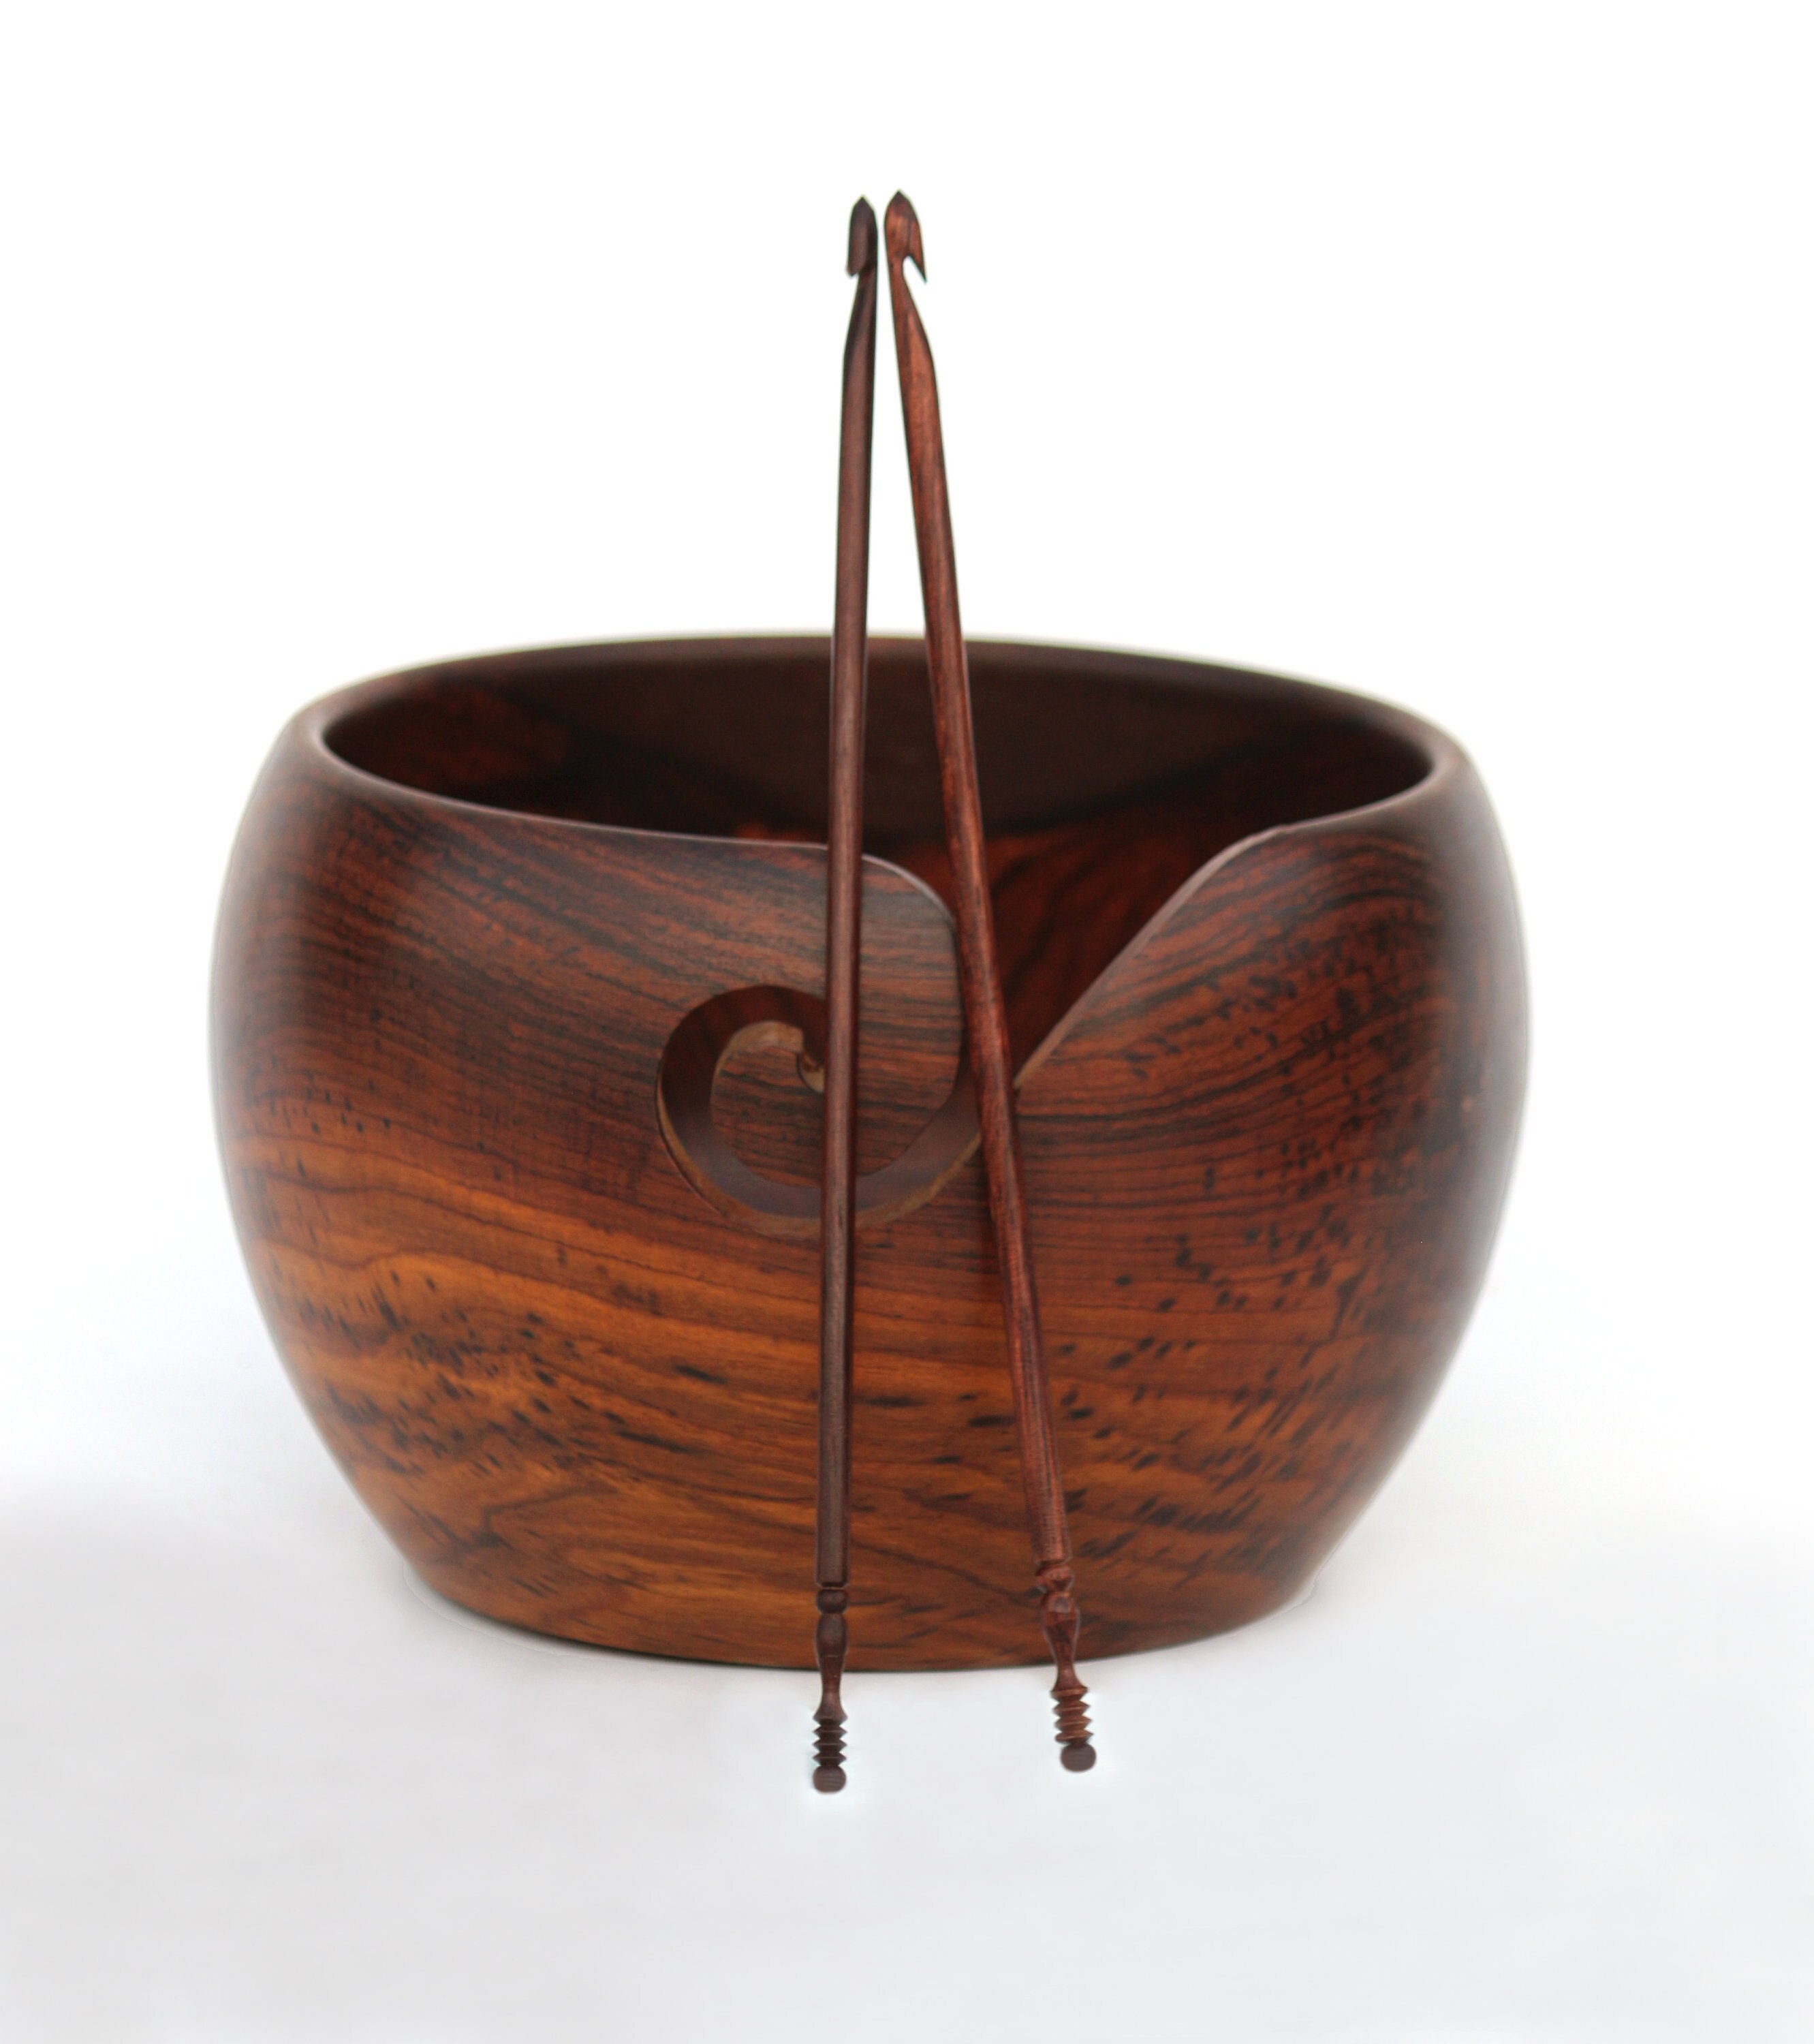 ZX Vision Wooden Yarn Bowl with Holes Holder Rosewood Handmade Craft Knitting Bowl Storage Knitting and Crocheting Accessories Kit Organizer, Perfect